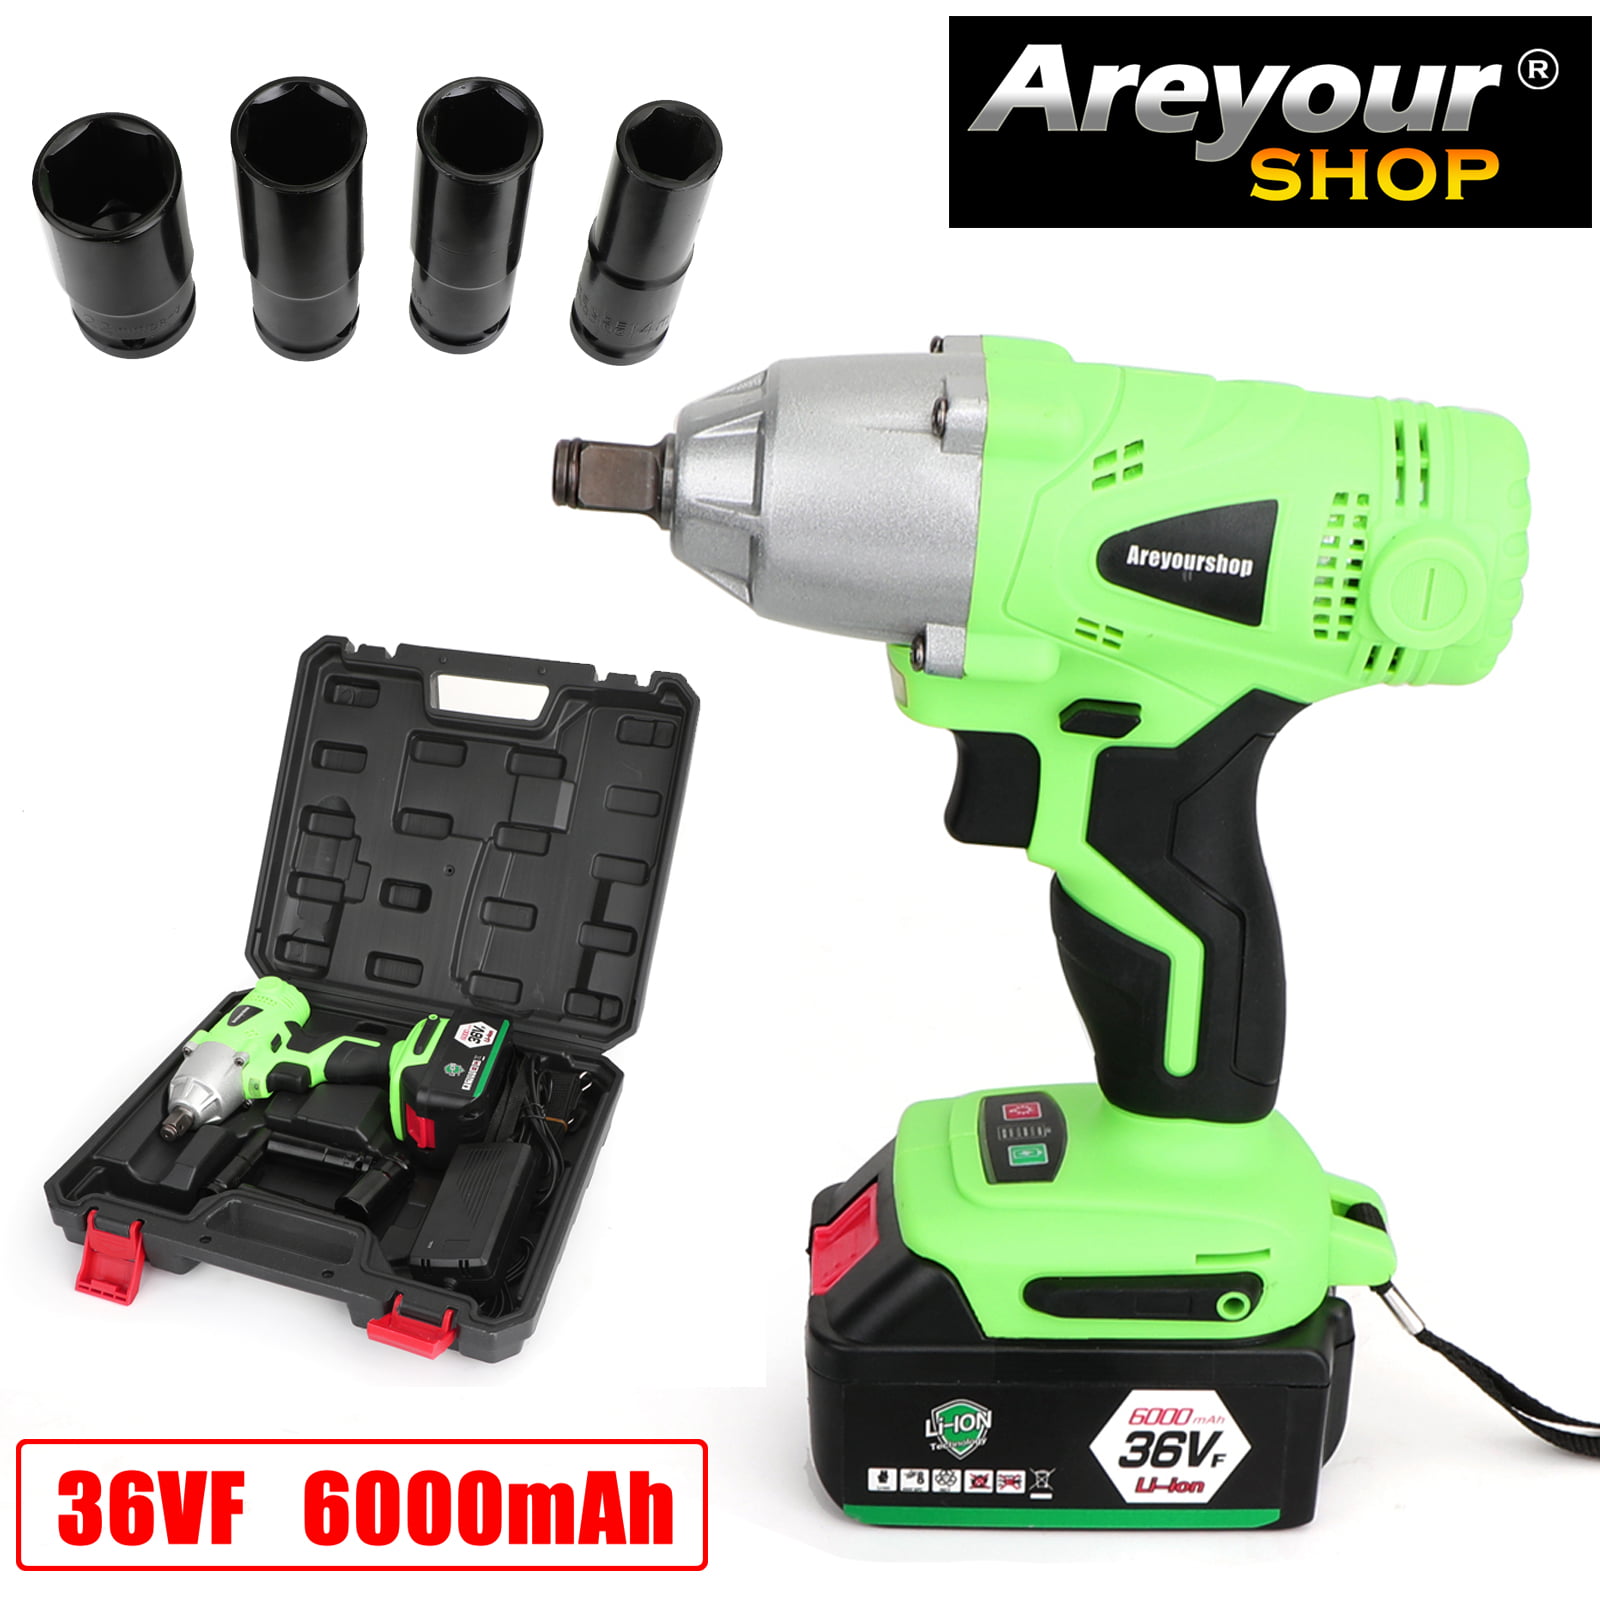 36VF Cordless Impact Wrench,36VF Li-ion Rechargeable Cordless 1/2 Inch Wrench Adjustable Speed with LED Light 100~240V UK Plug 